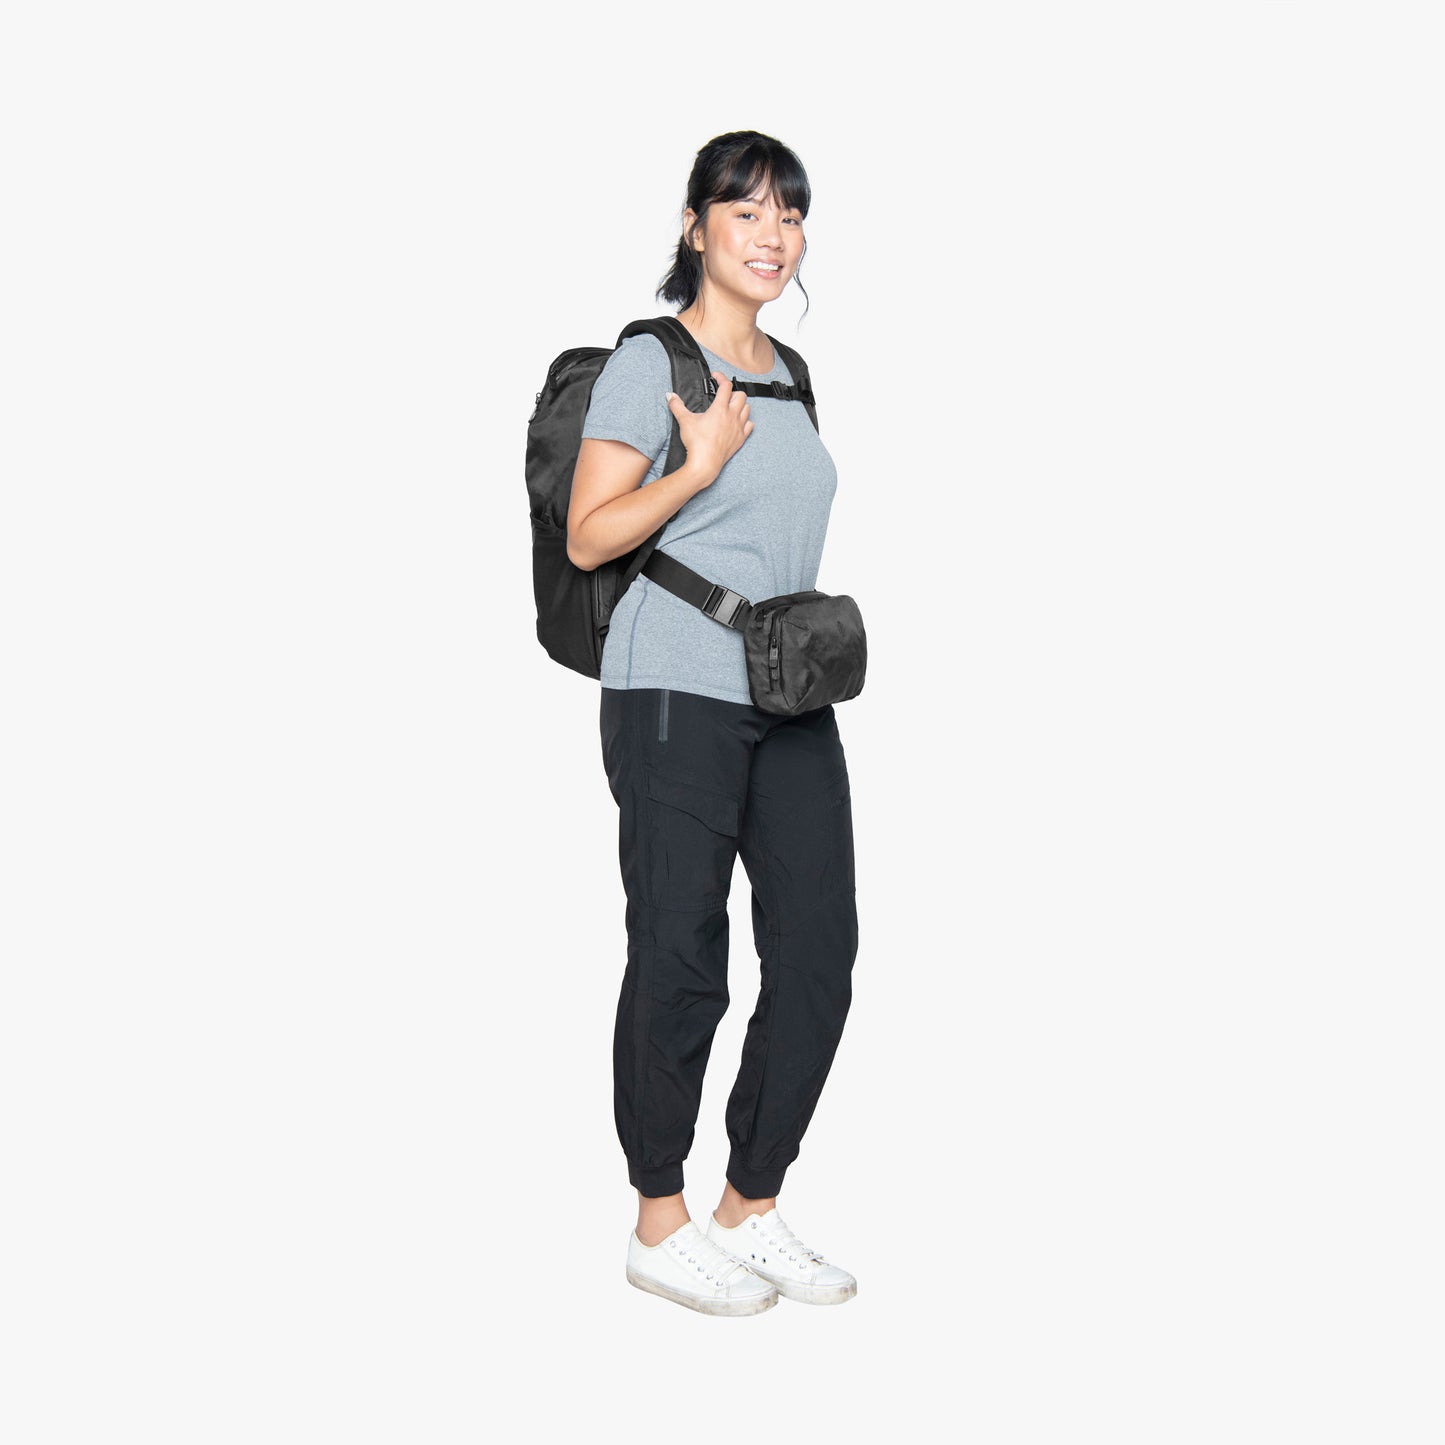 Hands-free carry with your Travel Backpack